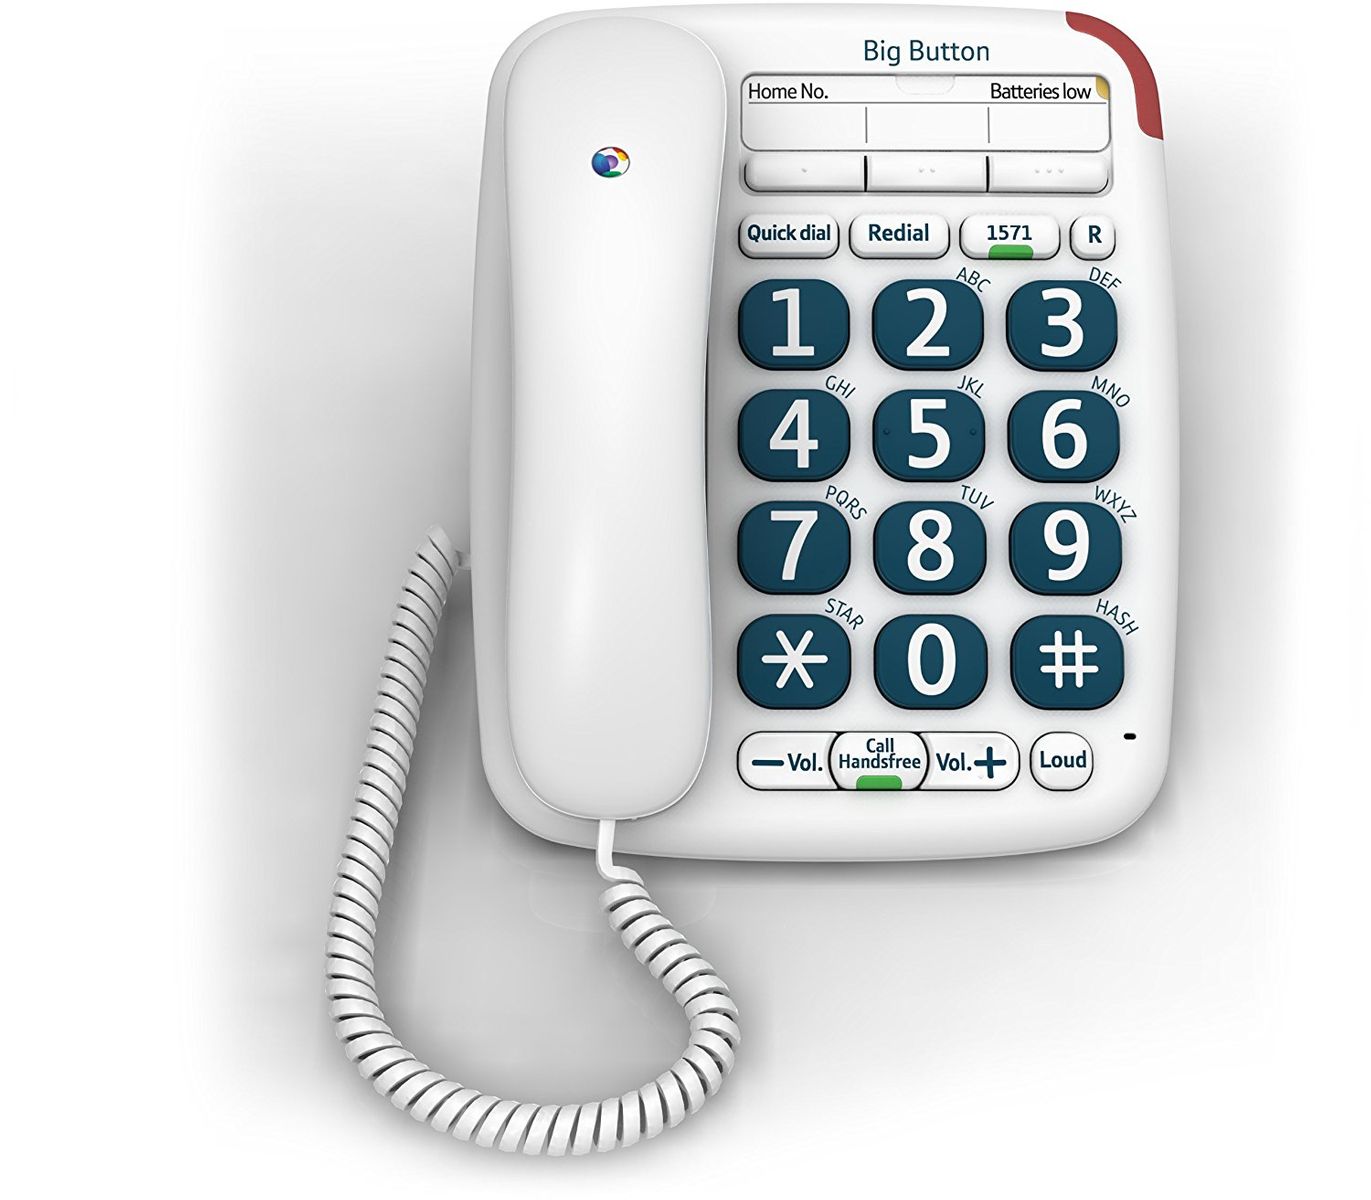 BT BIG BUTTON 200 CORDED TELEPHONEWHITE